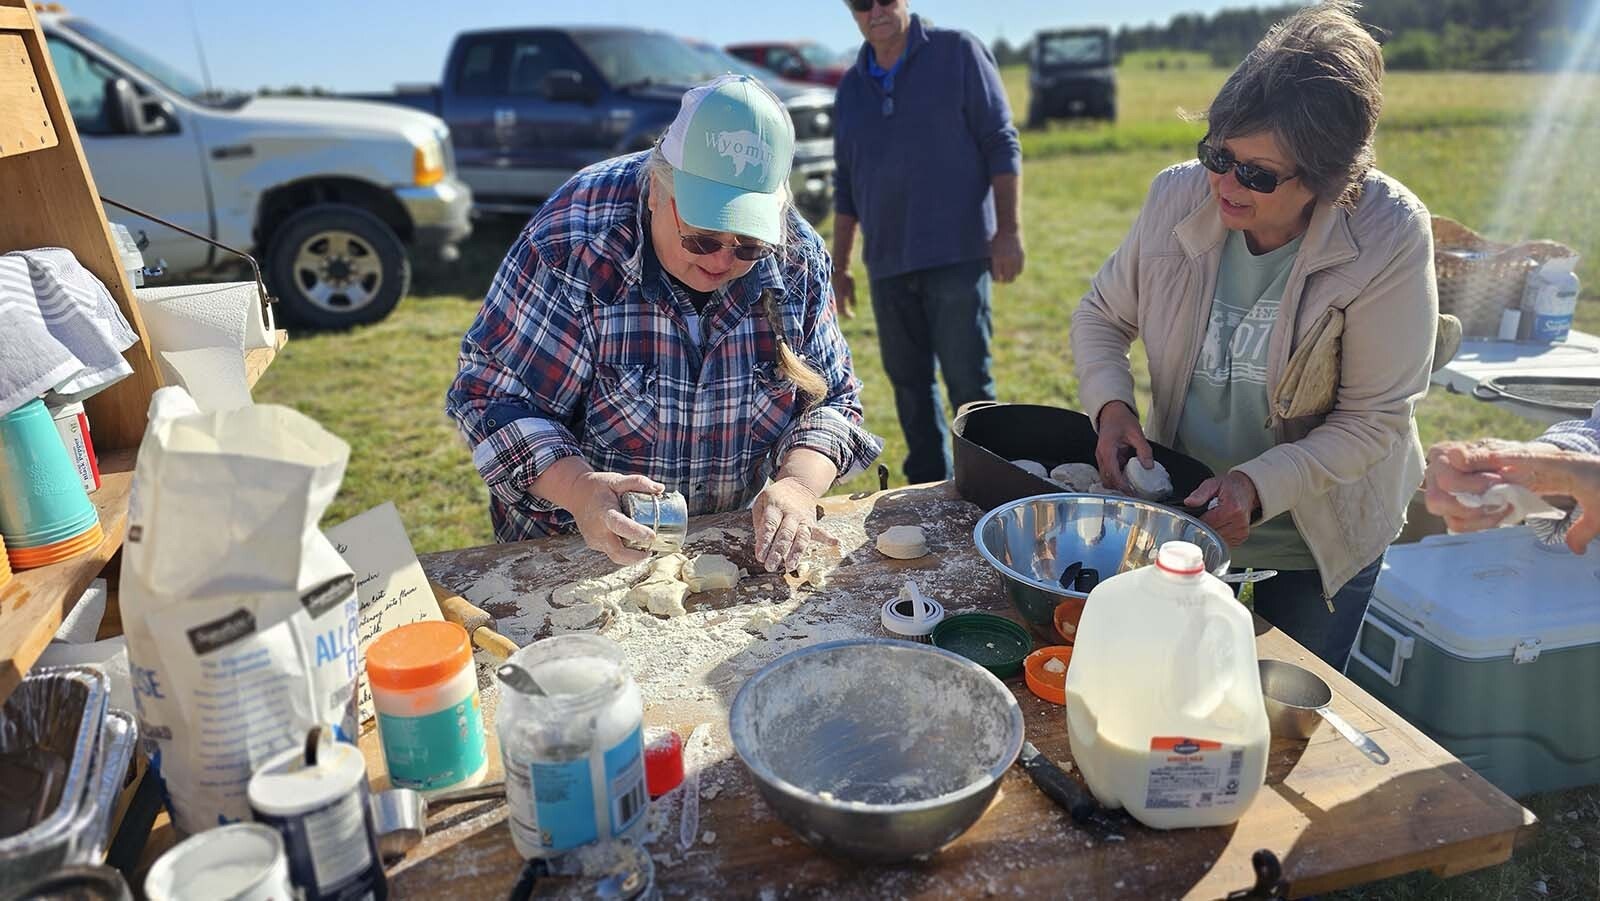 Debbie Arnol, left, and Sherry Armstrong cutting out biscuits at the chuckwagon breakfast before the Buckboard Sunday at Esterbrook Church.